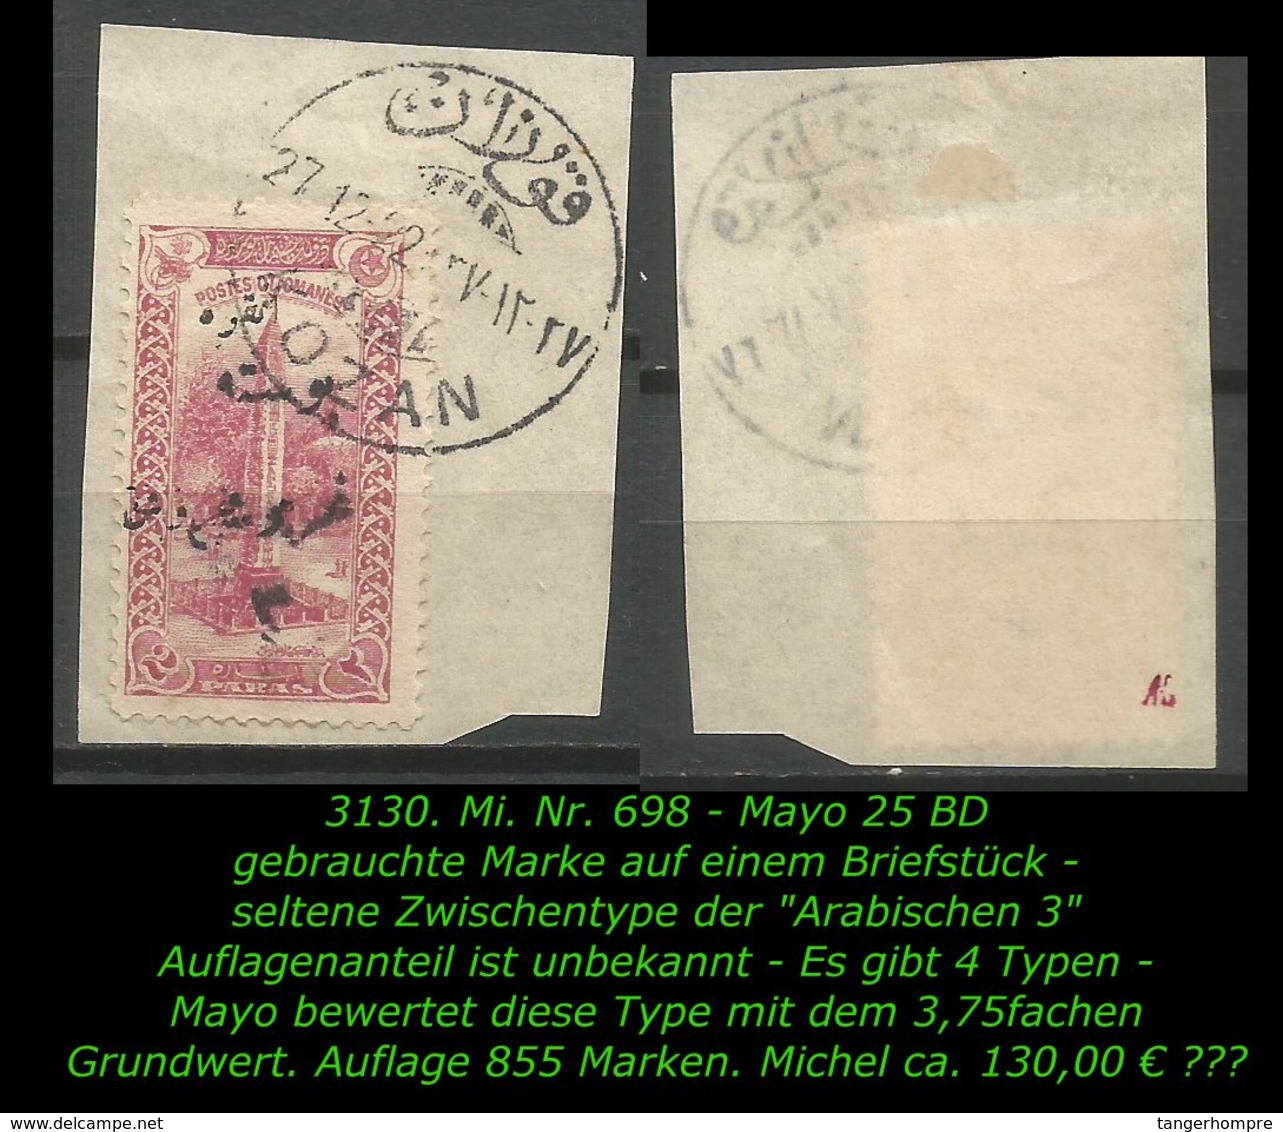 TURKEY ,EARLY OTTOMAN SPECIALIZED FOR SPECIALIST, SEE...Mi. Nr. 698 - Mayo 25 BD -RR- - 1920-21 Anatolië